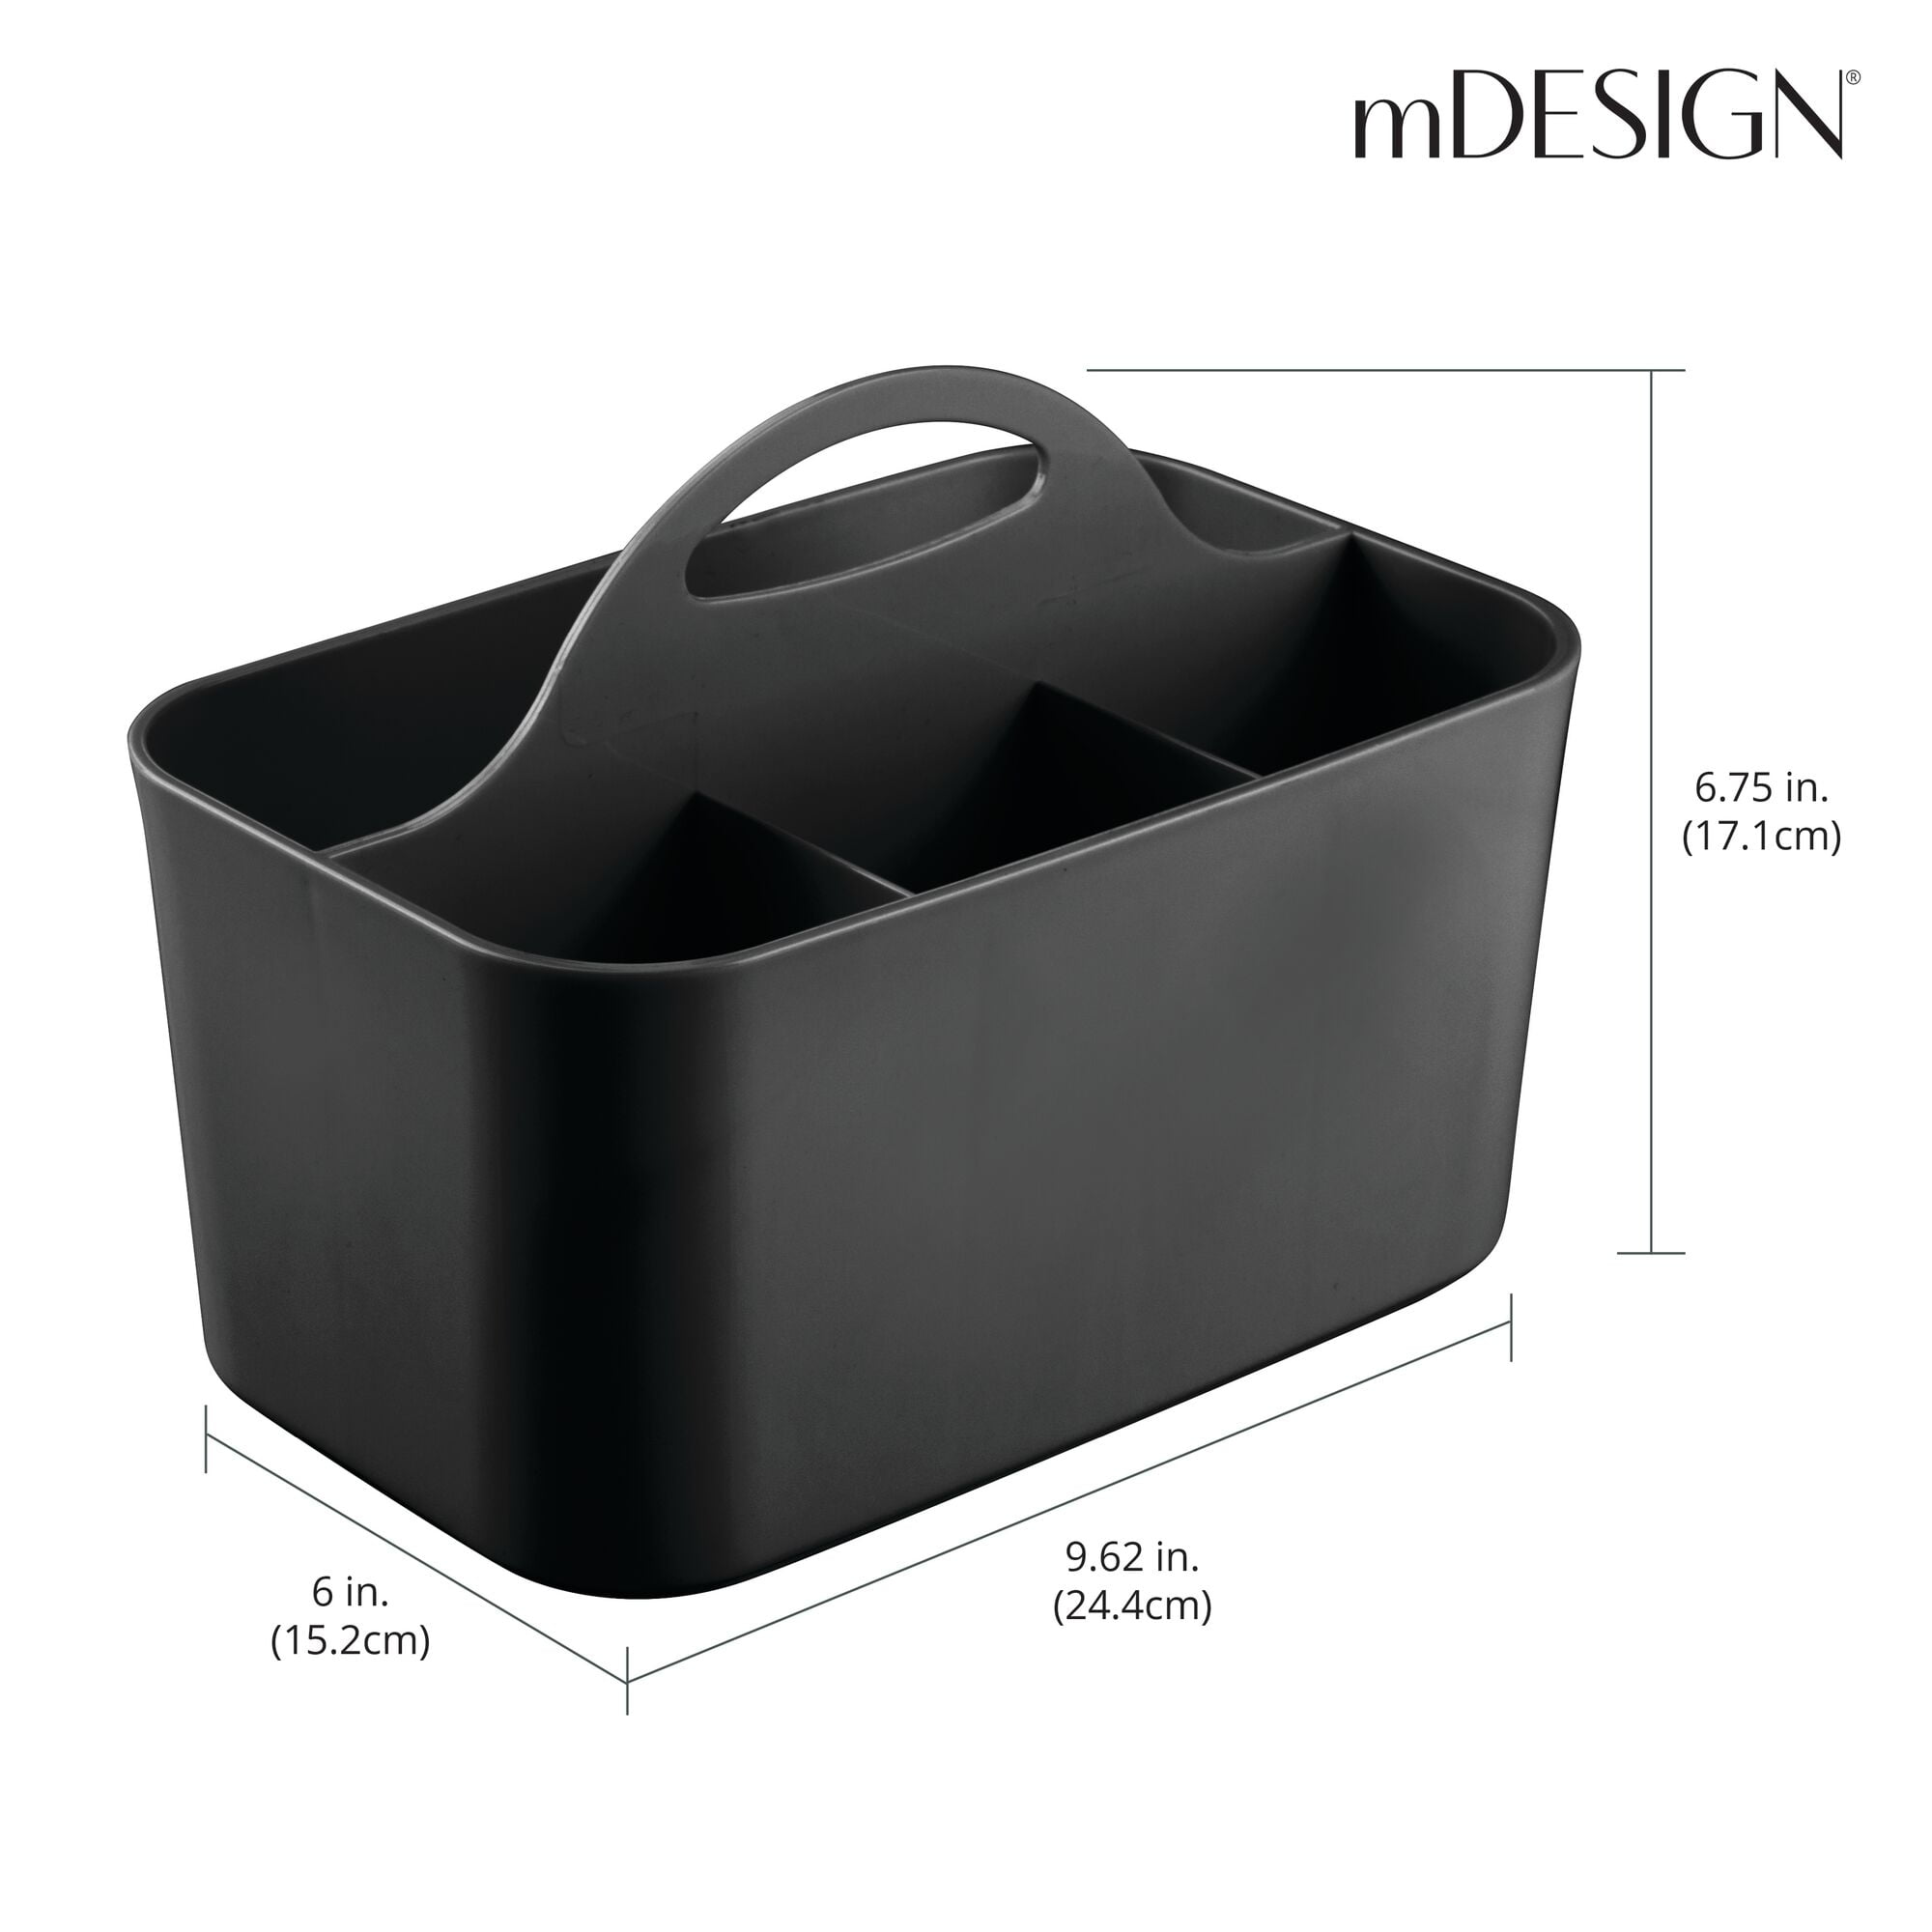 9 x 5 Plastic Storage Caddy With 3 Compartments 217g by Top Notch